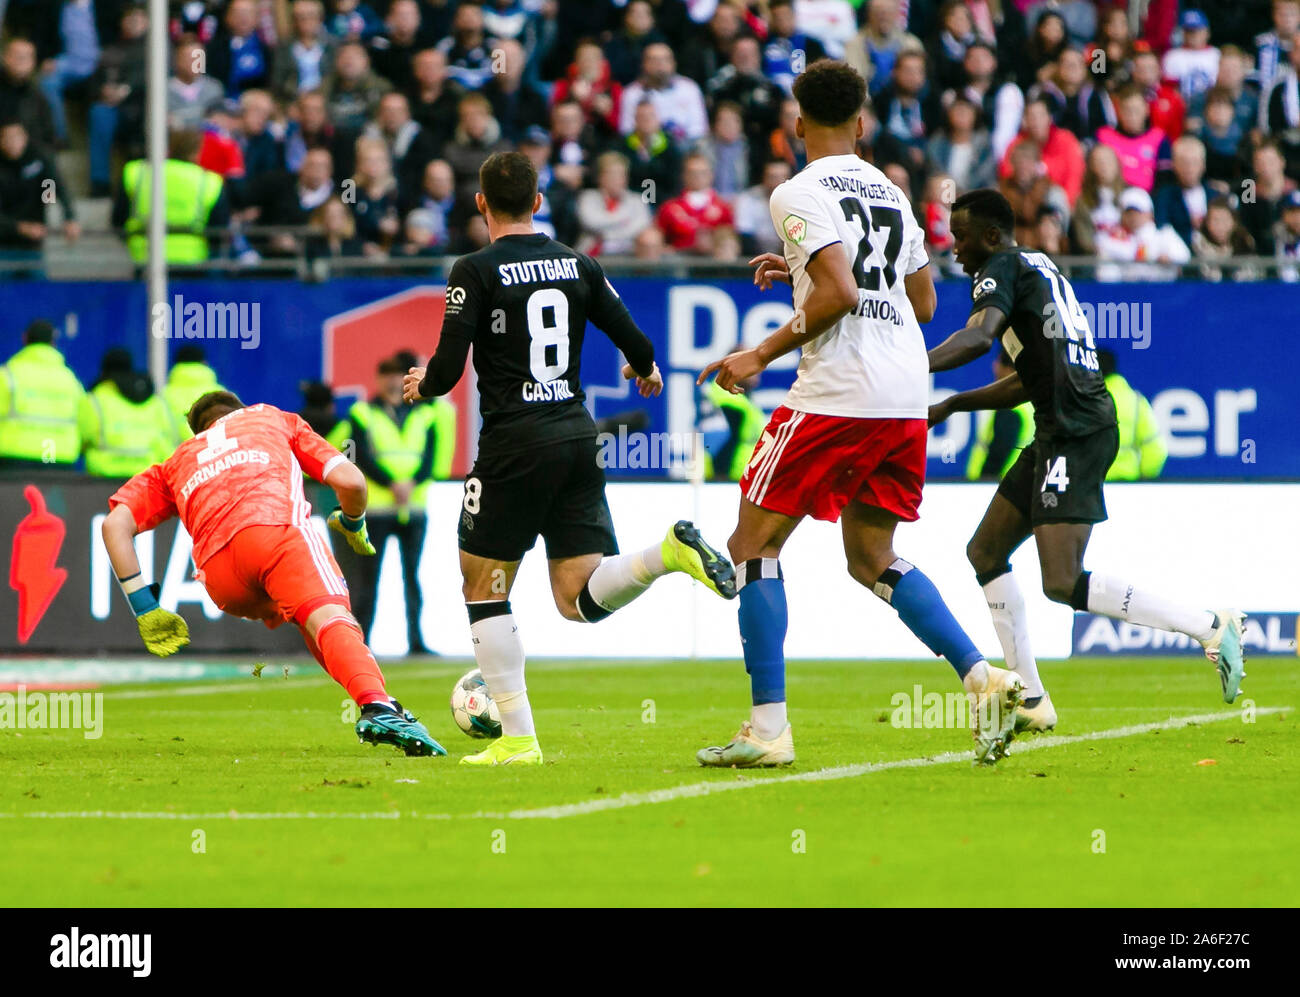 25 October 2019, Hamburg: Soccer: 2nd Bundesliga, Hamburger SV - VfB Stuttgart, 11th matchday in Volksparkstadion. Stuttgart's Silas Wamangituka (r) scores against Hamburg's Daniel Heuer Fernandes (l) for 2-4 for VfB. Stuttgart Gonzalo Castro and Hamburg's Josha Vagnoman (2nd from right) are watching. Photo: Frank Molter/dpa - IMPORTANT NOTE: In accordance with the requirements of the DFL Deutsche Fußball Liga or the DFB Deutscher Fußball-Bund, it is prohibited to use or have used photographs taken in the stadium and/or the match in the form of sequence images and/or video-like photo sequences Stock Photo